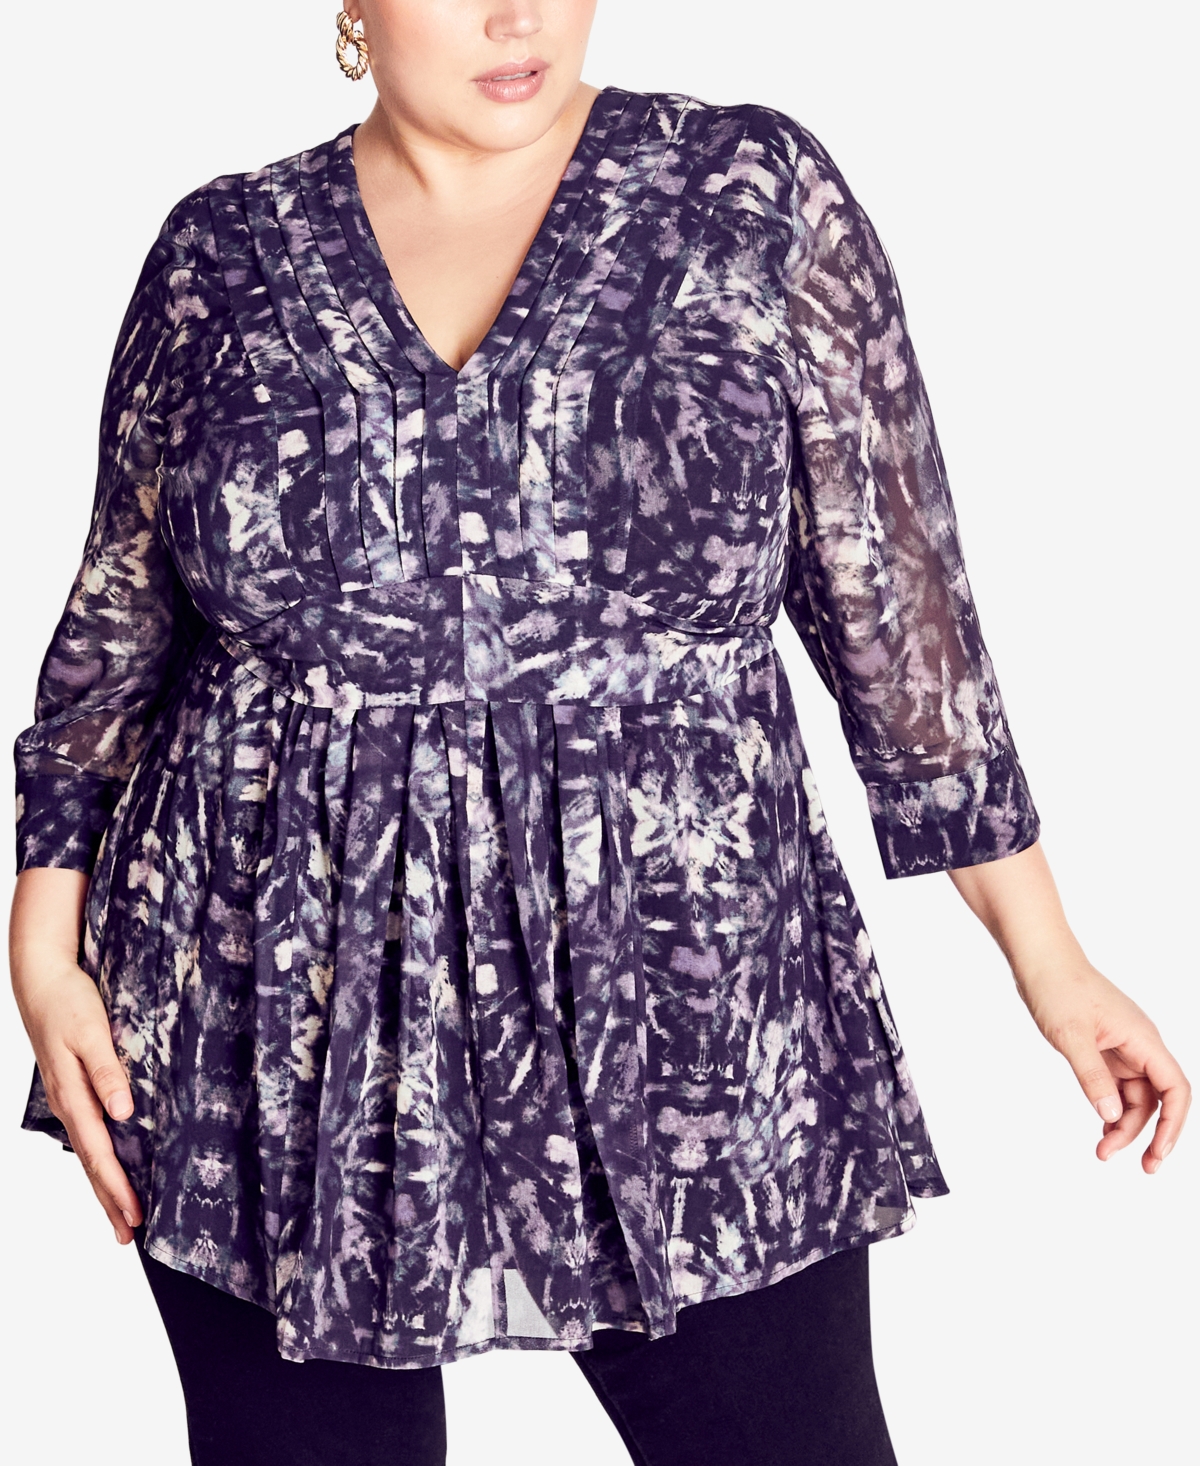 Avenue Plus Size Print Tunic Top - After Dark